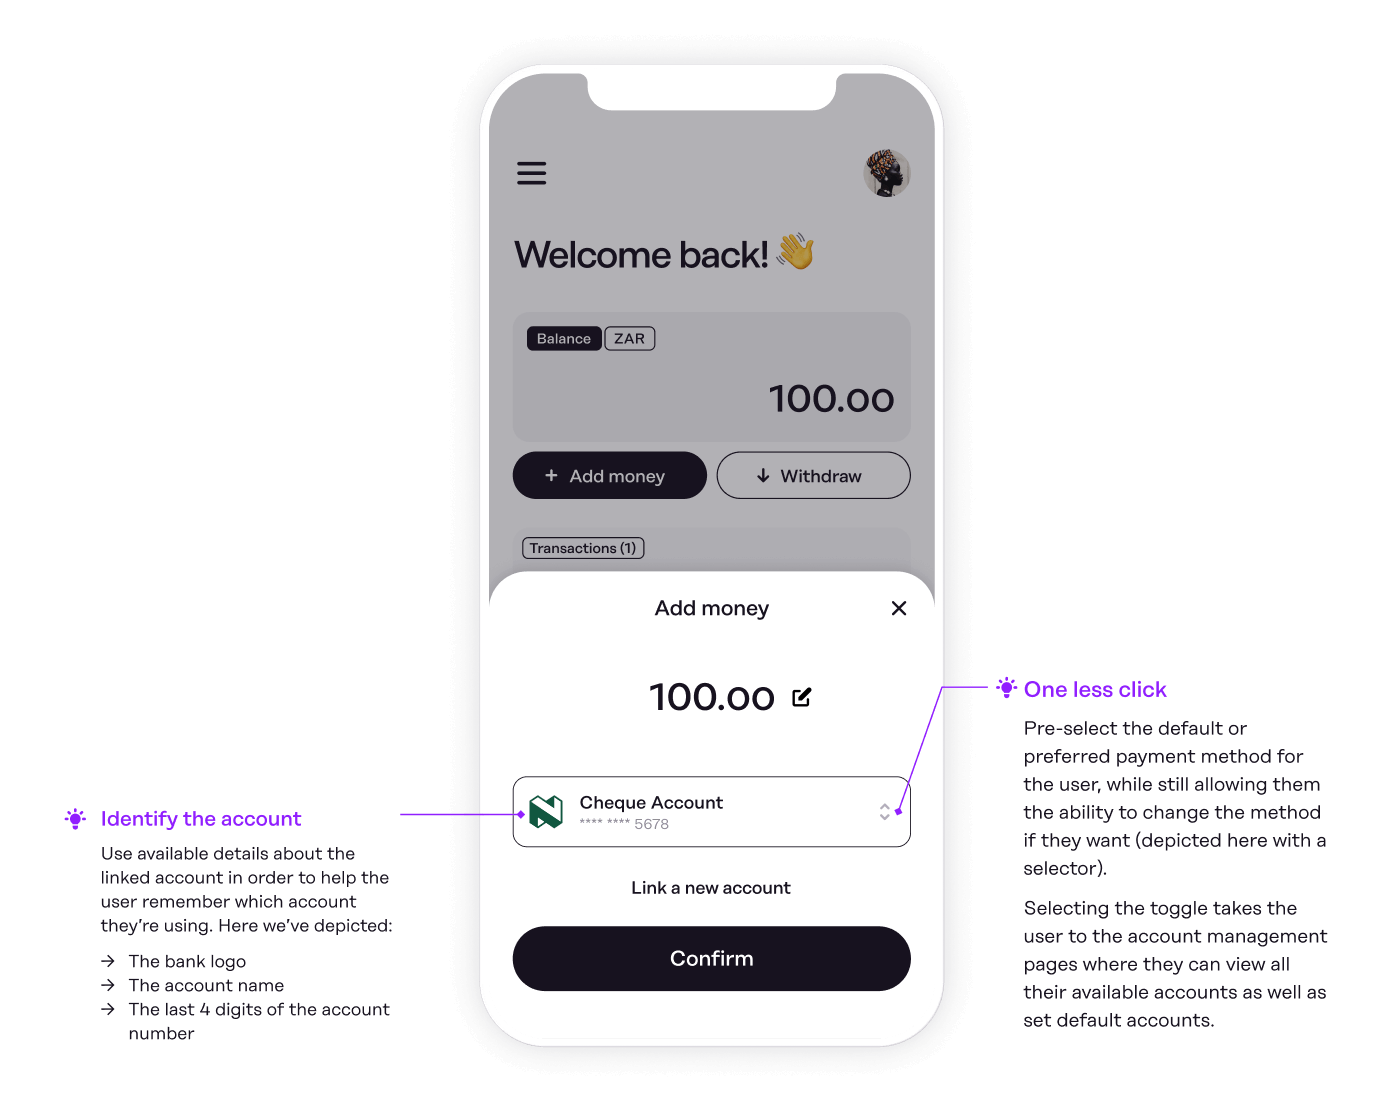 Payment methods screen featuring Linkpay returning user